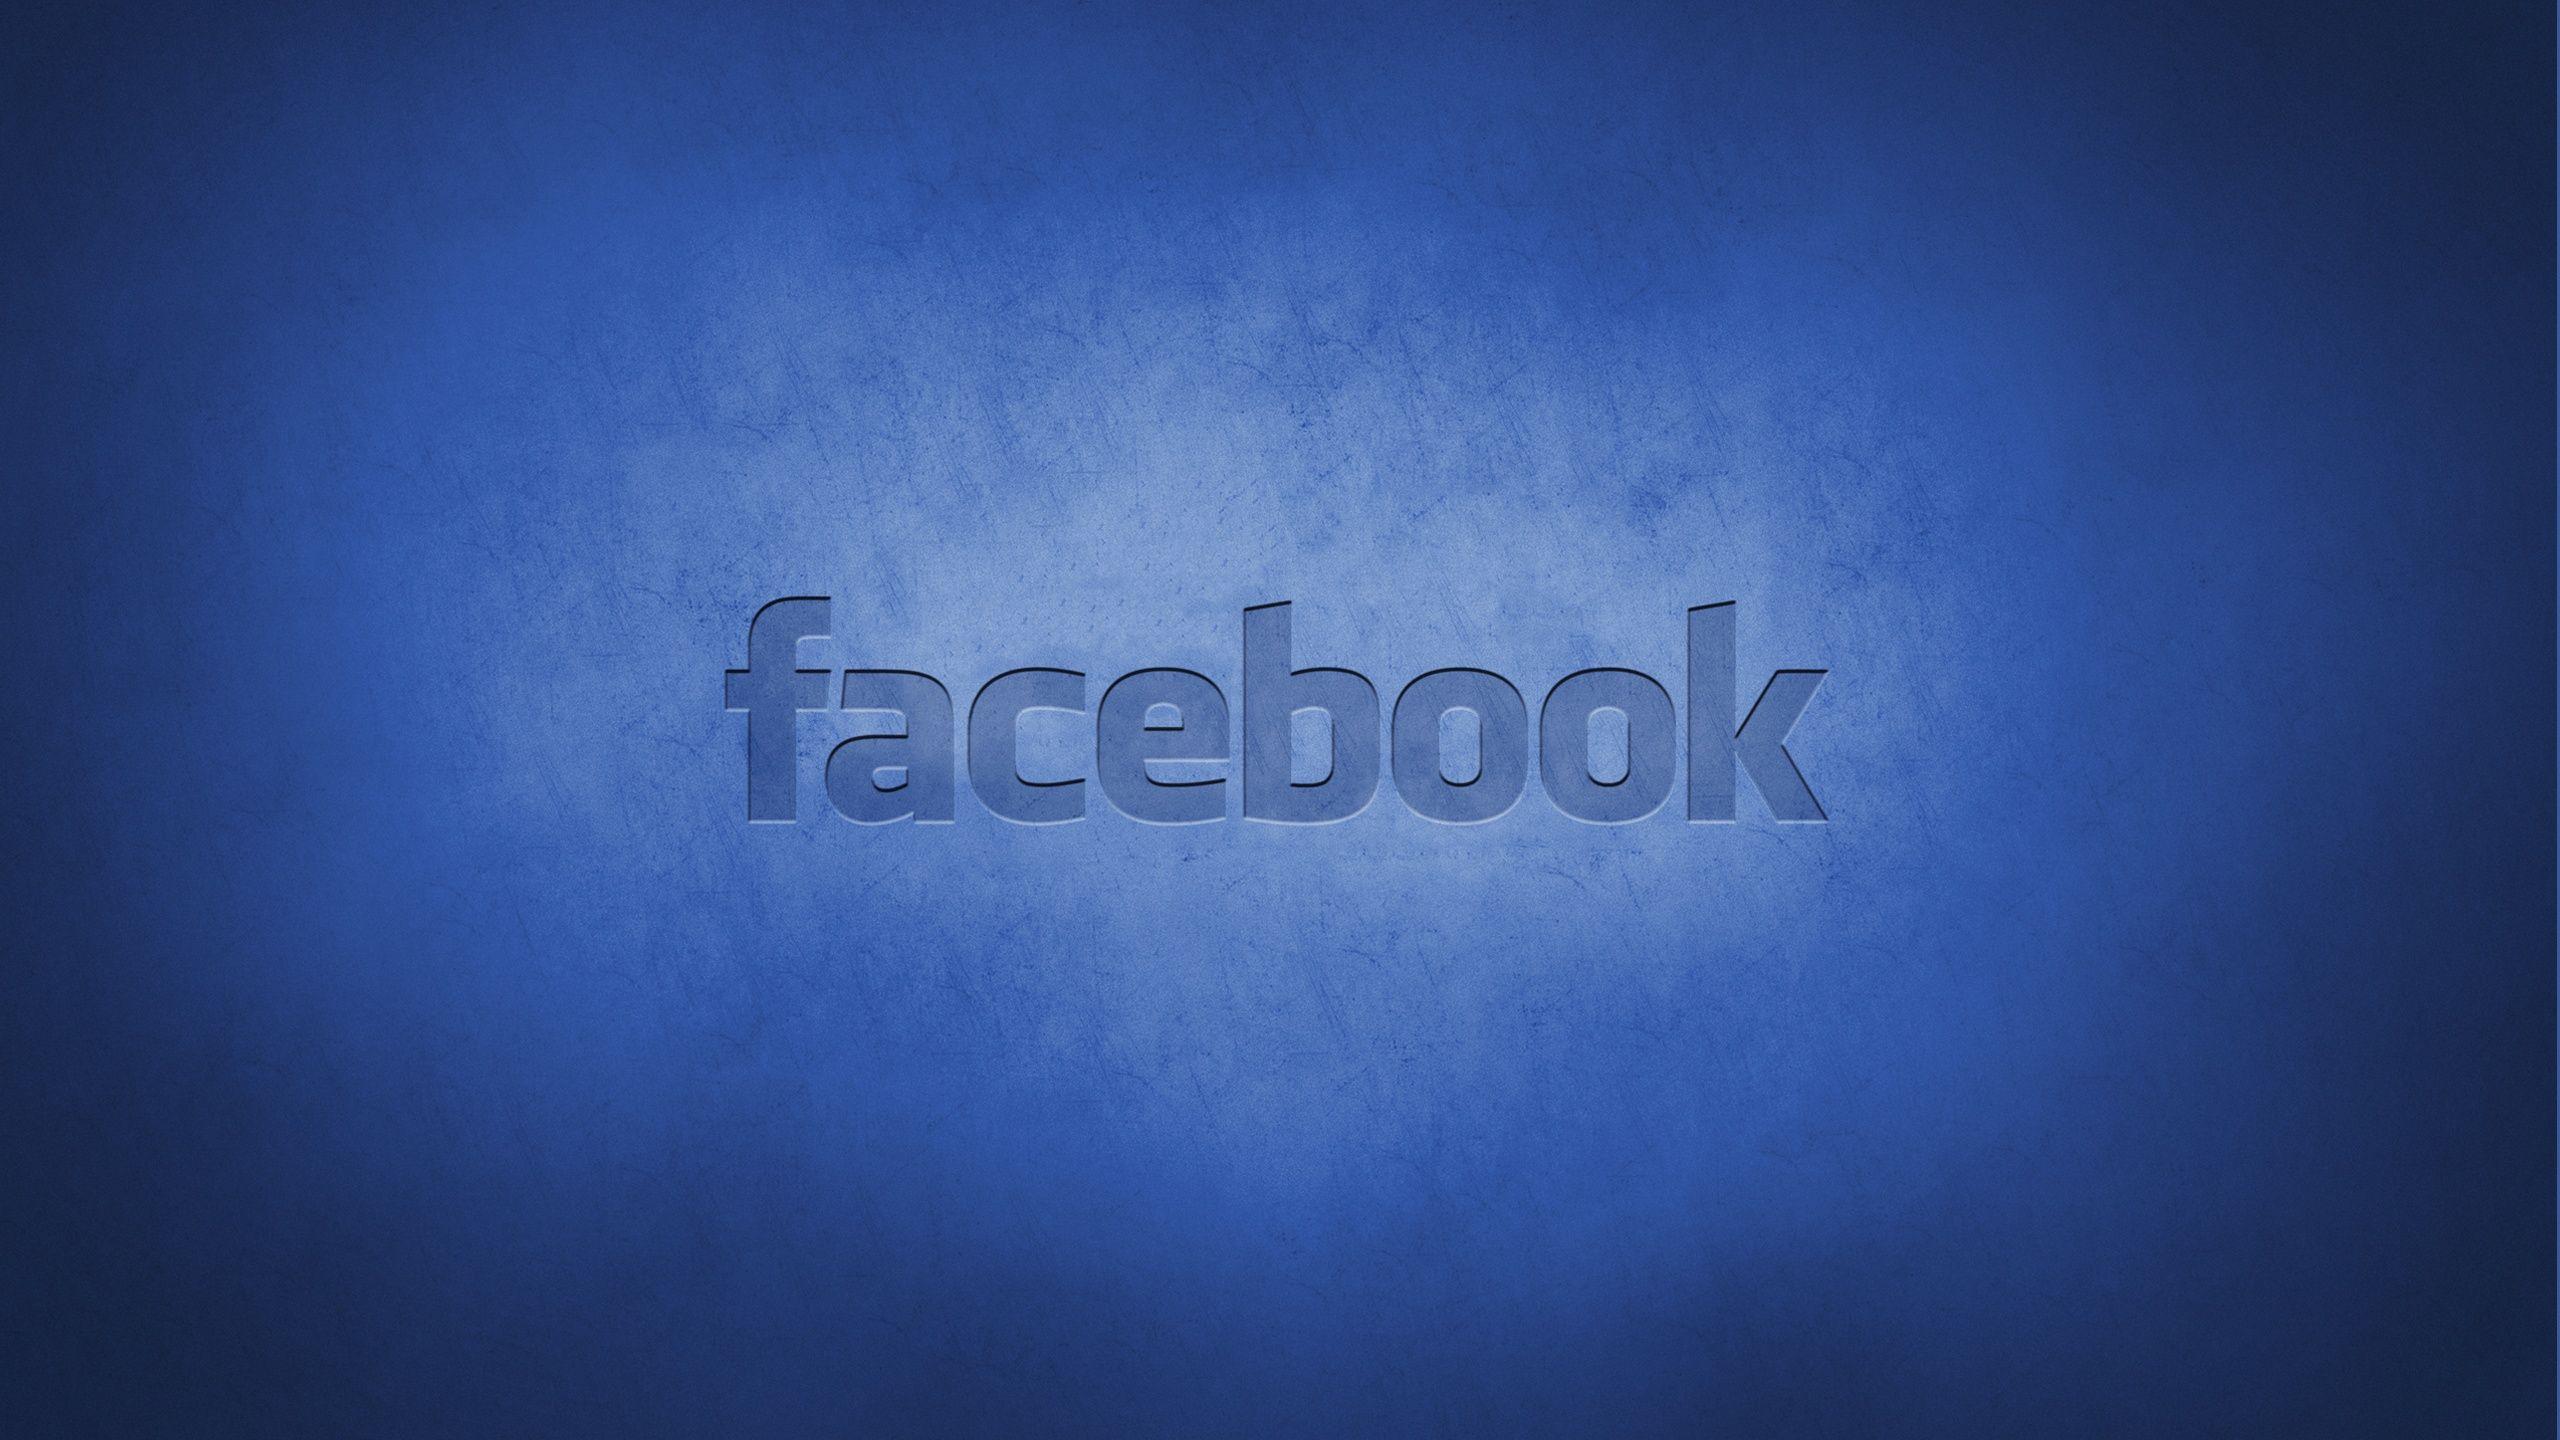 Facebook Full HD Wallpaper and Background Imagex1440